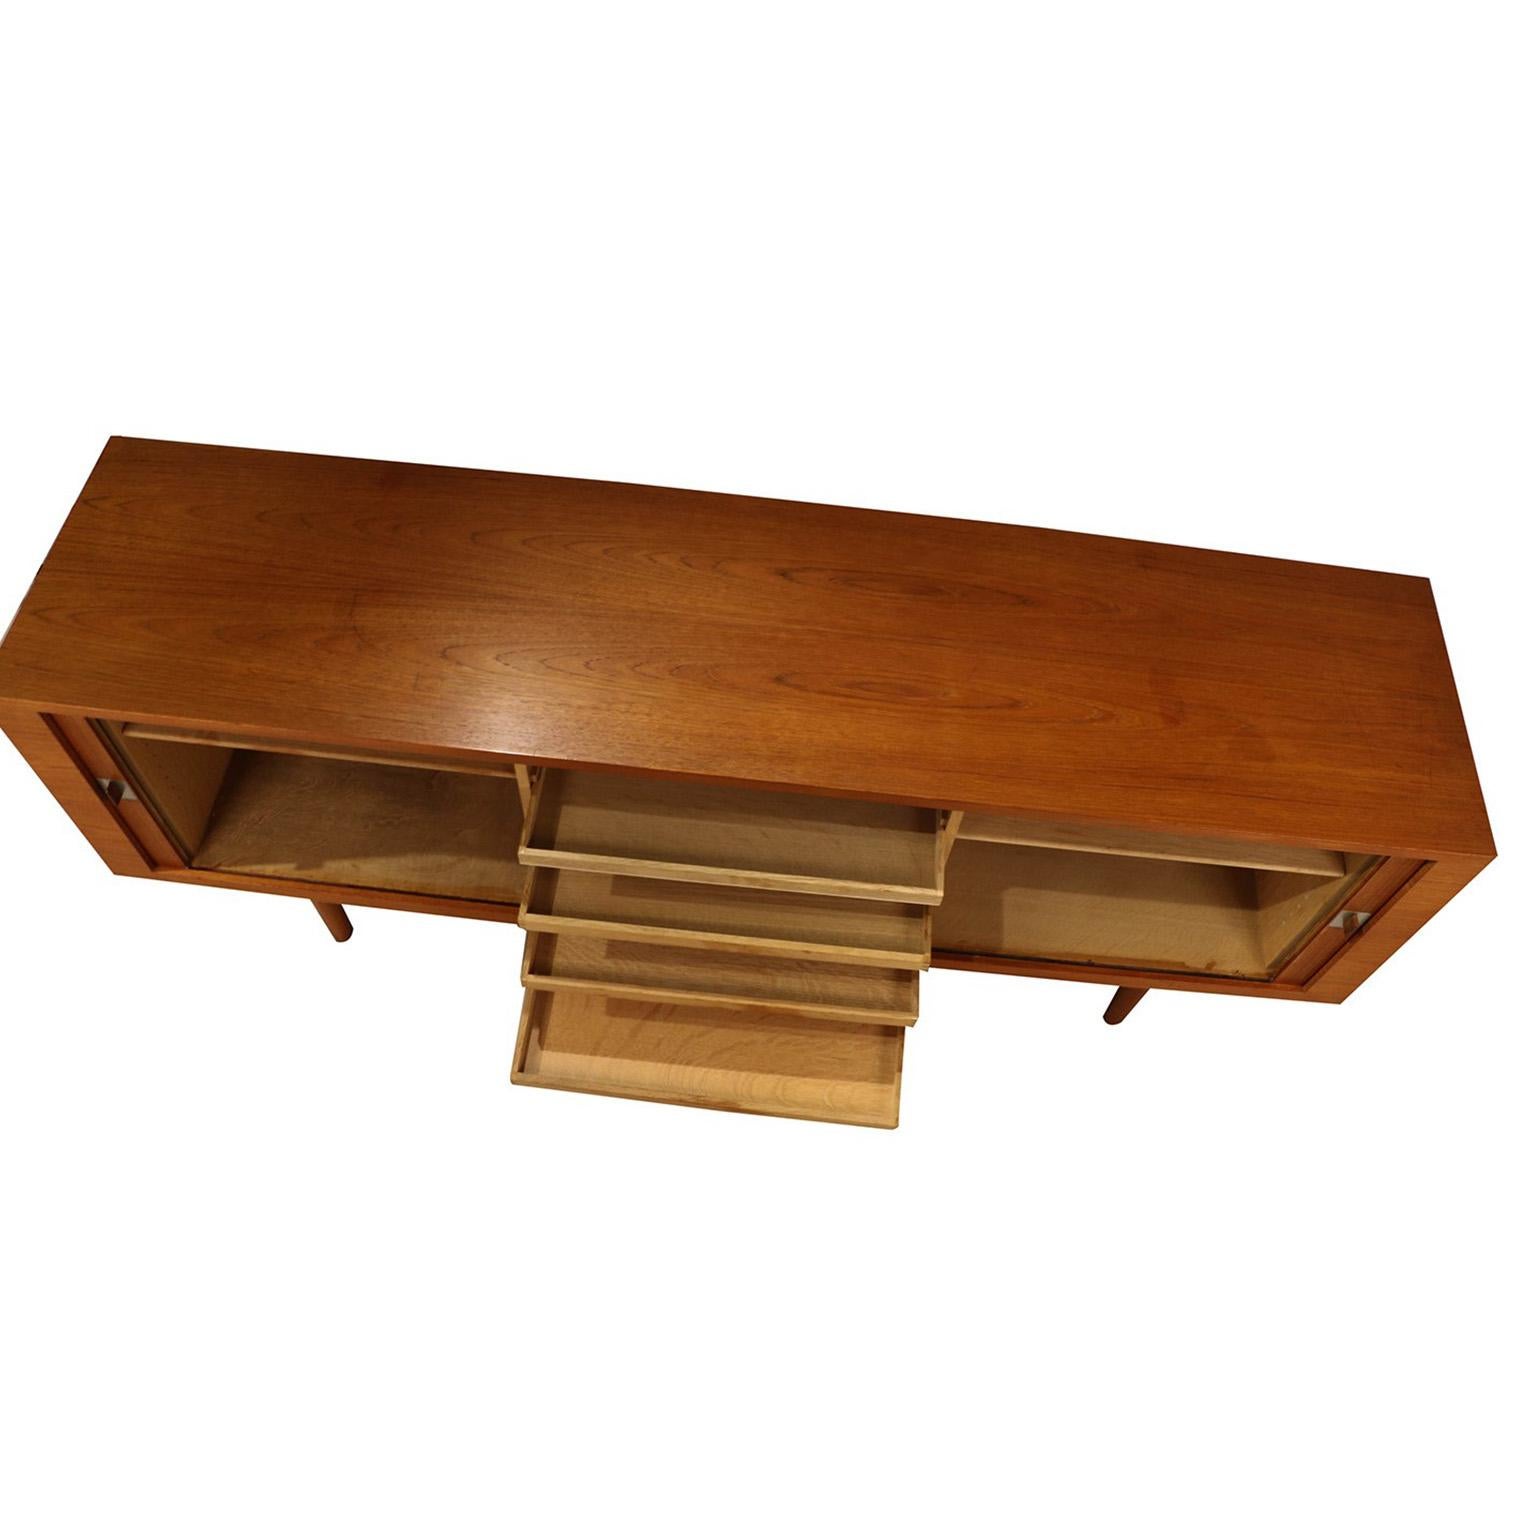 An absolutely stunning teak wood credenza model RY-25 “President” collectors credenza designed by Hans Wegner, and produced by Mobler of Denmark, circa 1965. This piece is long, low, and just stunning!!! Precisely crafted in exceptional teak grain